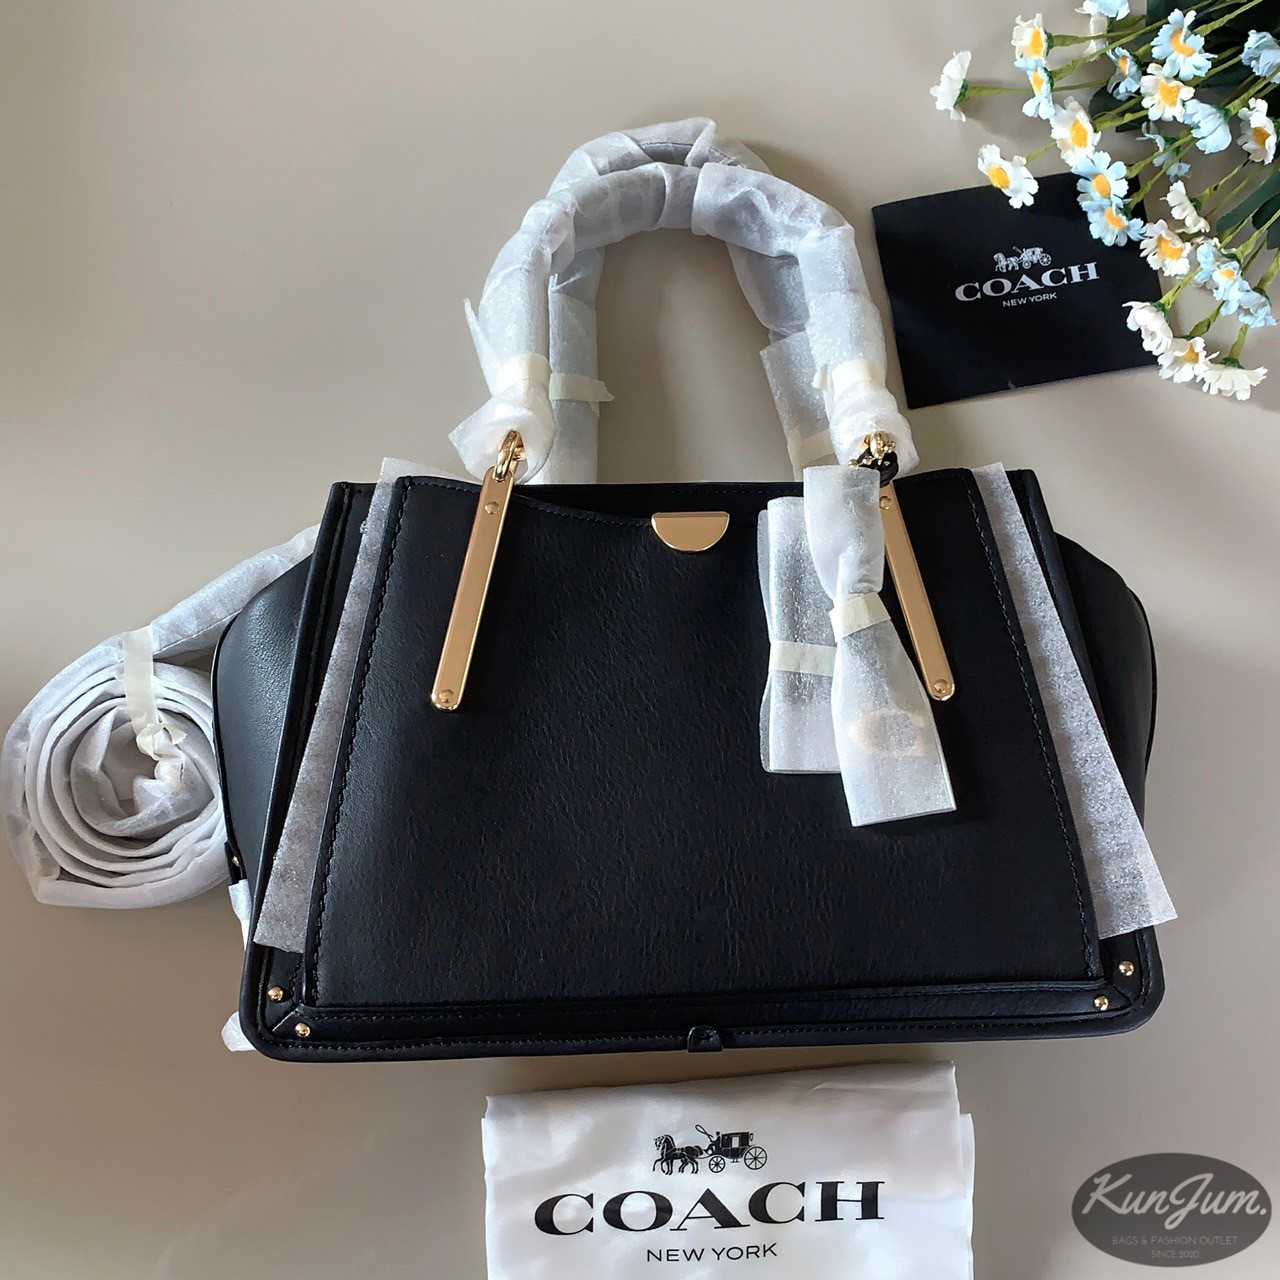 COACH (Style No.30947) | LINE SHOPPING